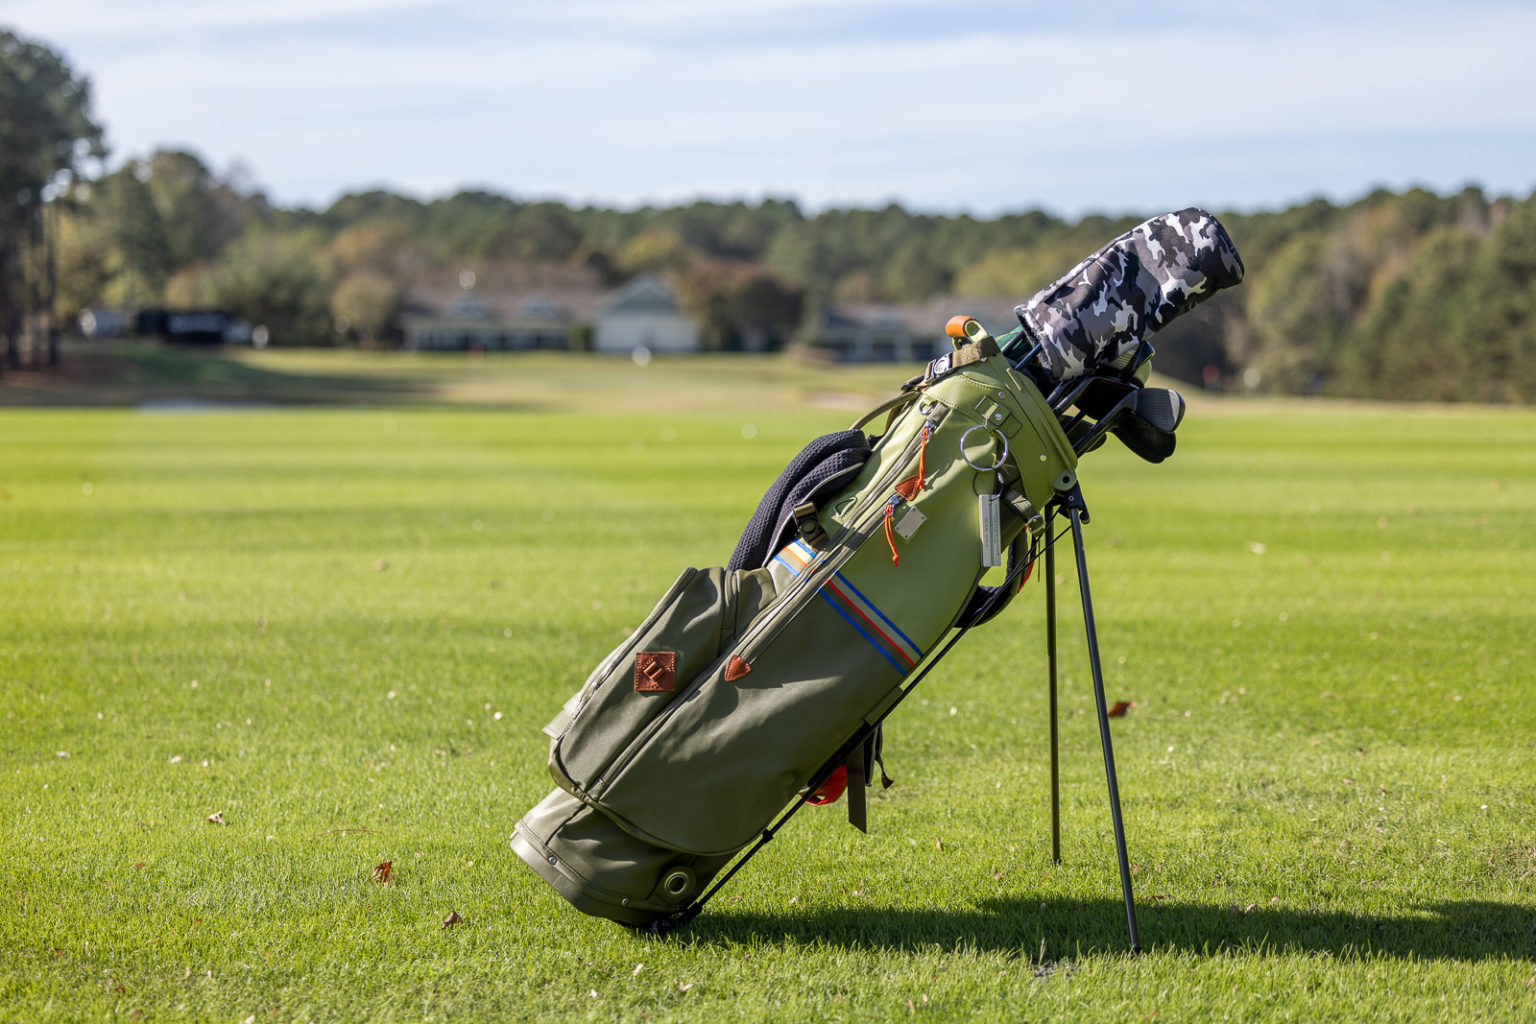 Best golf travel accessories 2022: 13 things to pack for your next trip